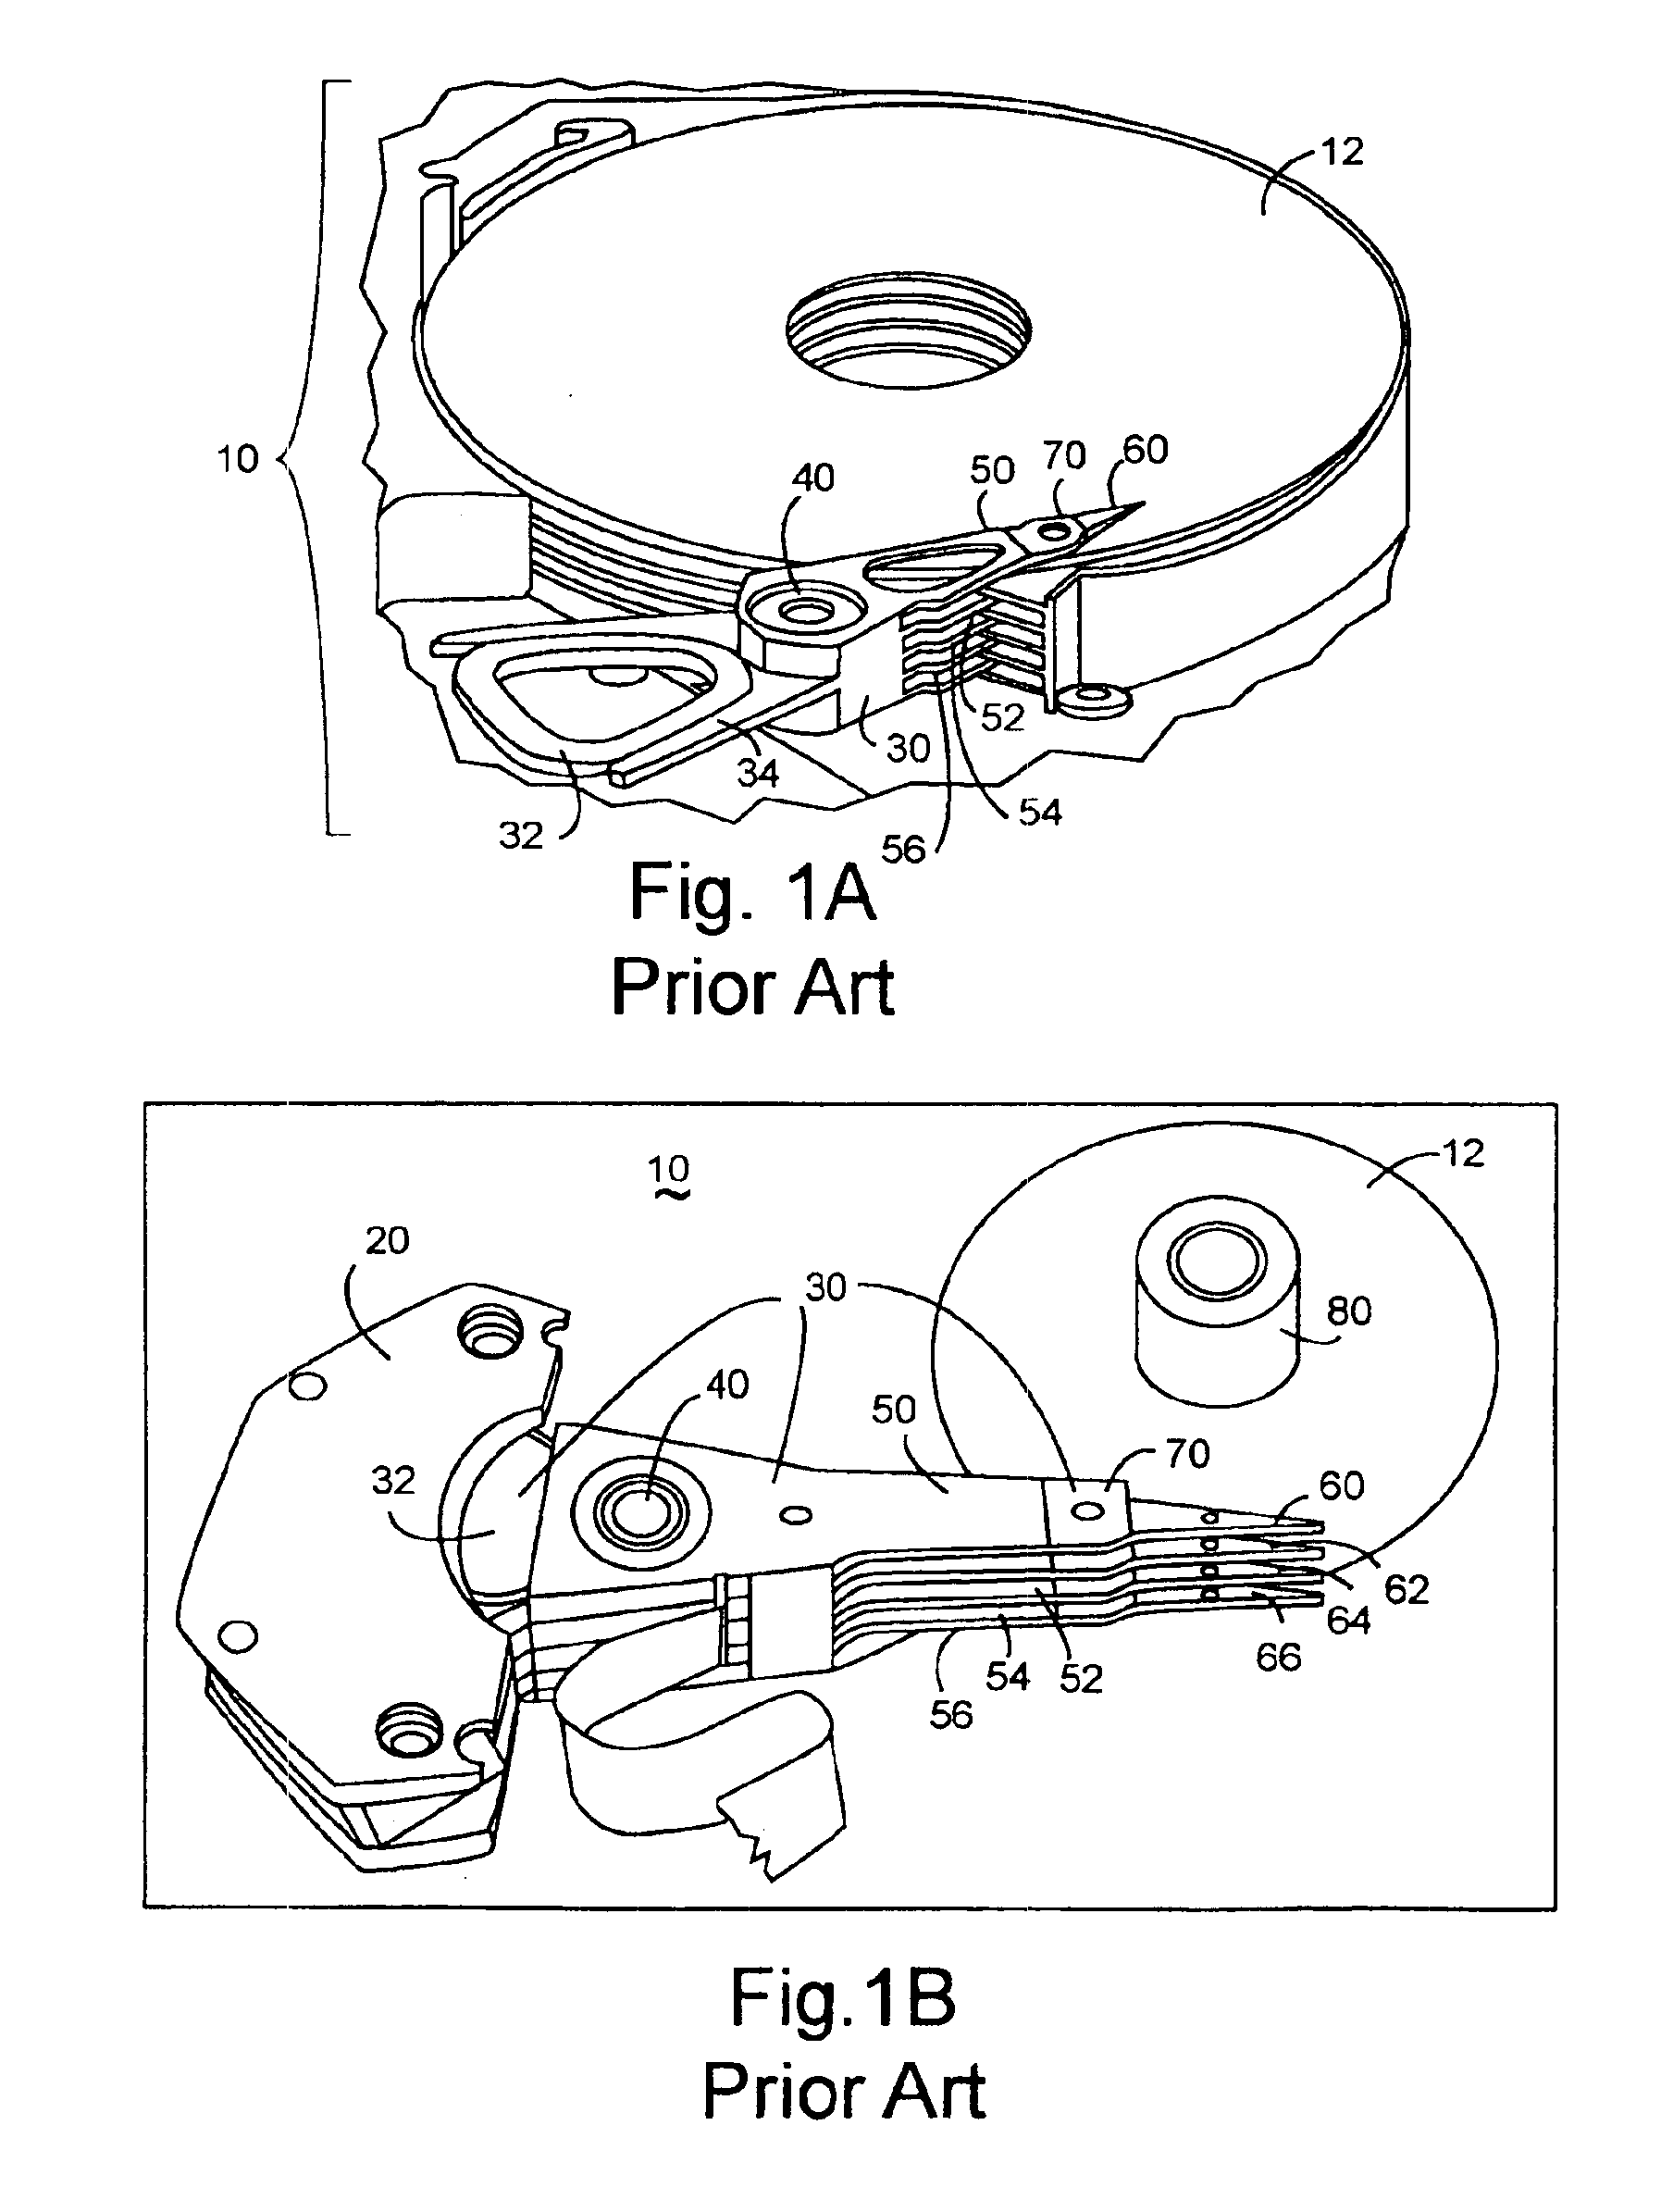 Apparatus and method for dampening disk vibration in storage devices